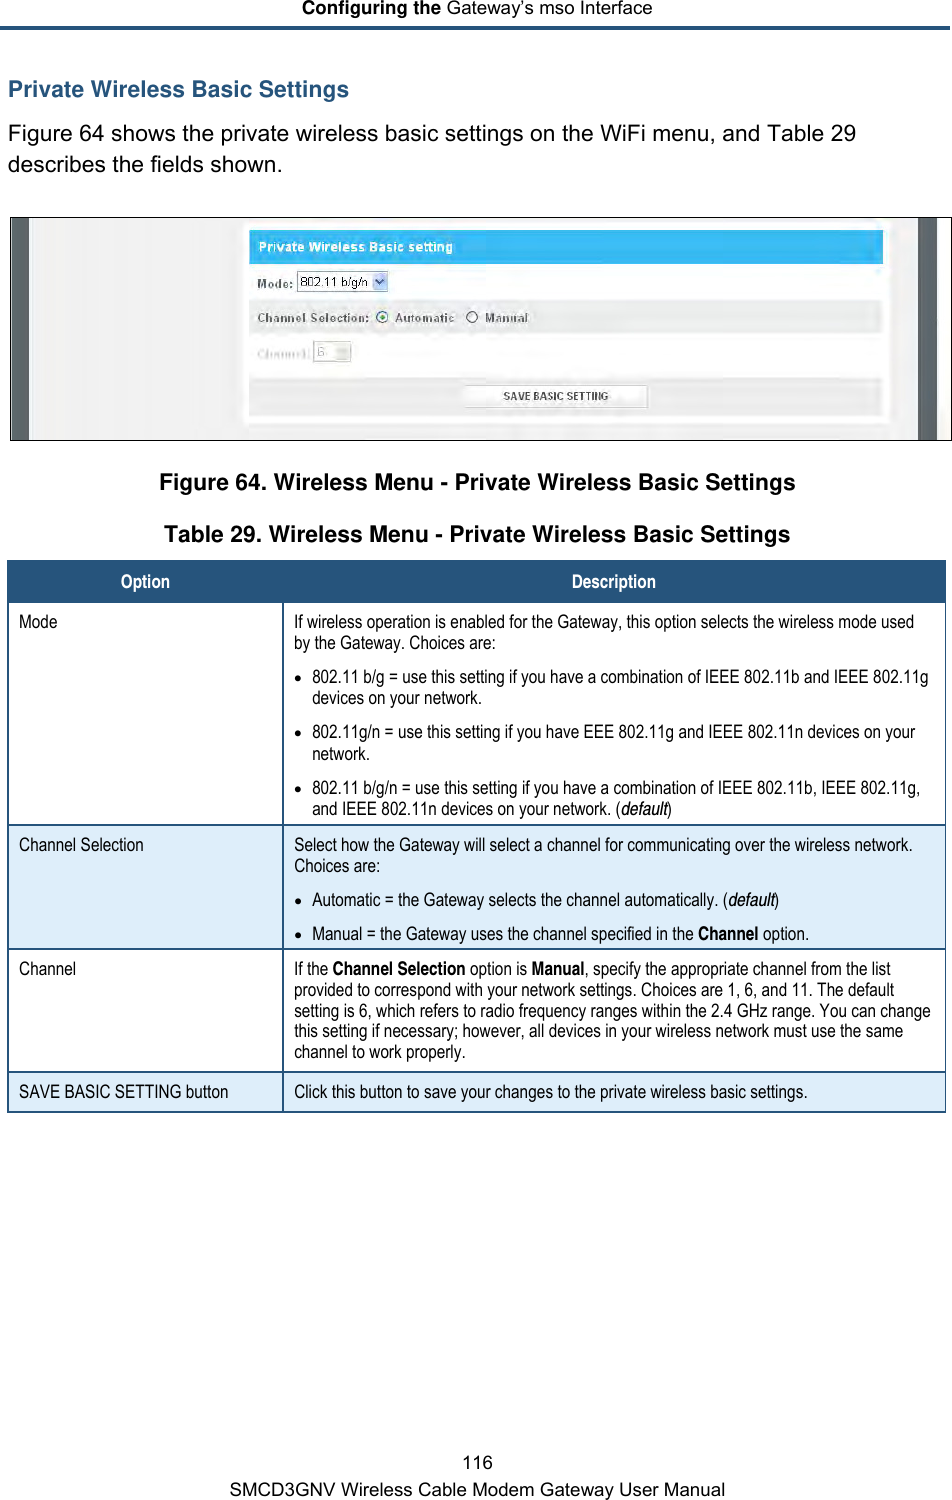 Configuring the Gateway’s mso Interface 116 SMCD3GNV Wireless Cable Modem Gateway User Manual Private Wireless Basic Settings Figure 64 shows the private wireless basic settings on the WiFi menu, and Table 29 describes the fields shown.  Figure 64. Wireless Menu - Private Wireless Basic Settings Table 29. Wireless Menu - Private Wireless Basic Settings Option Description Mode If wireless operation is enabled for the Gateway, this option selects the wireless mode used by the Gateway. Choices are: • 802.11 b/g = use this setting if you have a combination of IEEE 802.11b and IEEE 802.11g devices on your network. • 802.11g/n = use this setting if you have EEE 802.11g and IEEE 802.11n devices on your network. • 802.11 b/g/n = use this setting if you have a combination of IEEE 802.11b, IEEE 802.11g, and IEEE 802.11n devices on your network. (default) Channel Selection Select how the Gateway will select a channel for communicating over the wireless network. Choices are: • Automatic = the Gateway selects the channel automatically. (default) • Manual = the Gateway uses the channel specified in the Channel option. Channel If the Channel Selection option is Manual, specify the appropriate channel from the list provided to correspond with your network settings. Choices are 1, 6, and 11. The default setting is 6, which refers to radio frequency ranges within the 2.4 GHz range. You can change this setting if necessary; however, all devices in your wireless network must use the same channel to work properly. SAVE BASIC SETTING button Click this button to save your changes to the private wireless basic settings. 